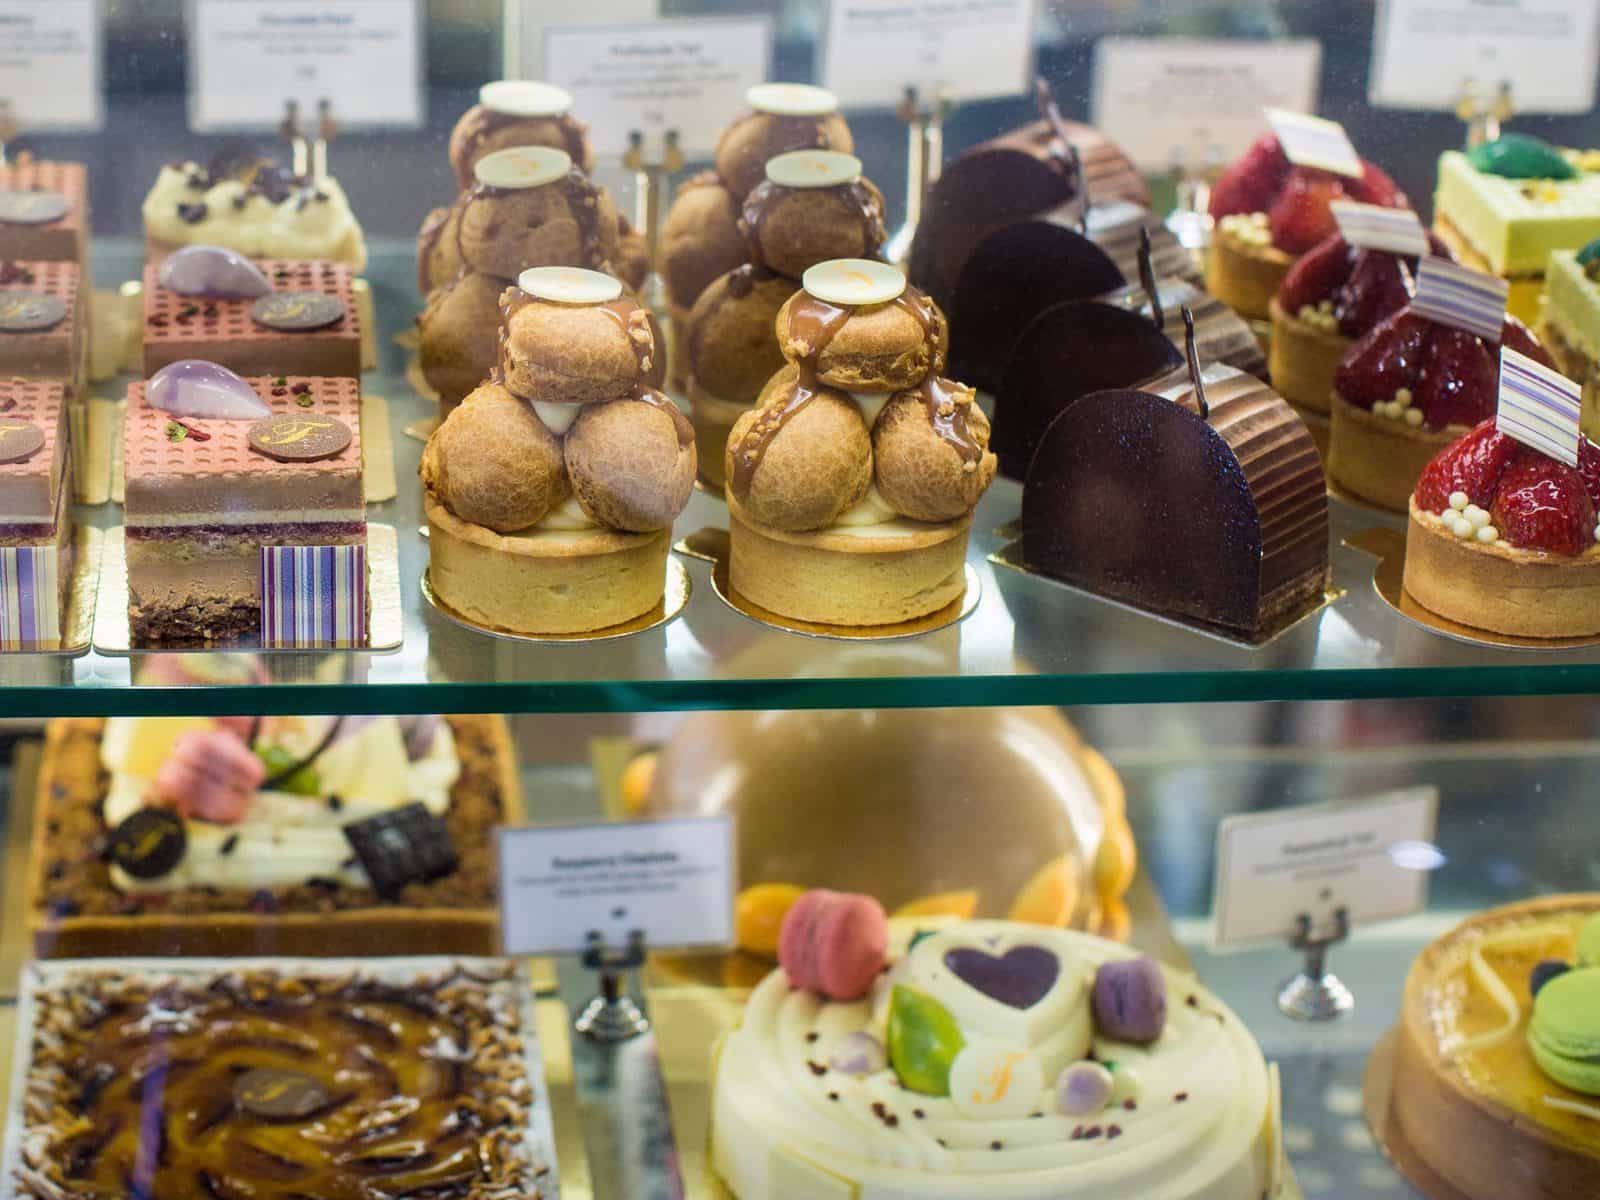 Display case of large and small cakes